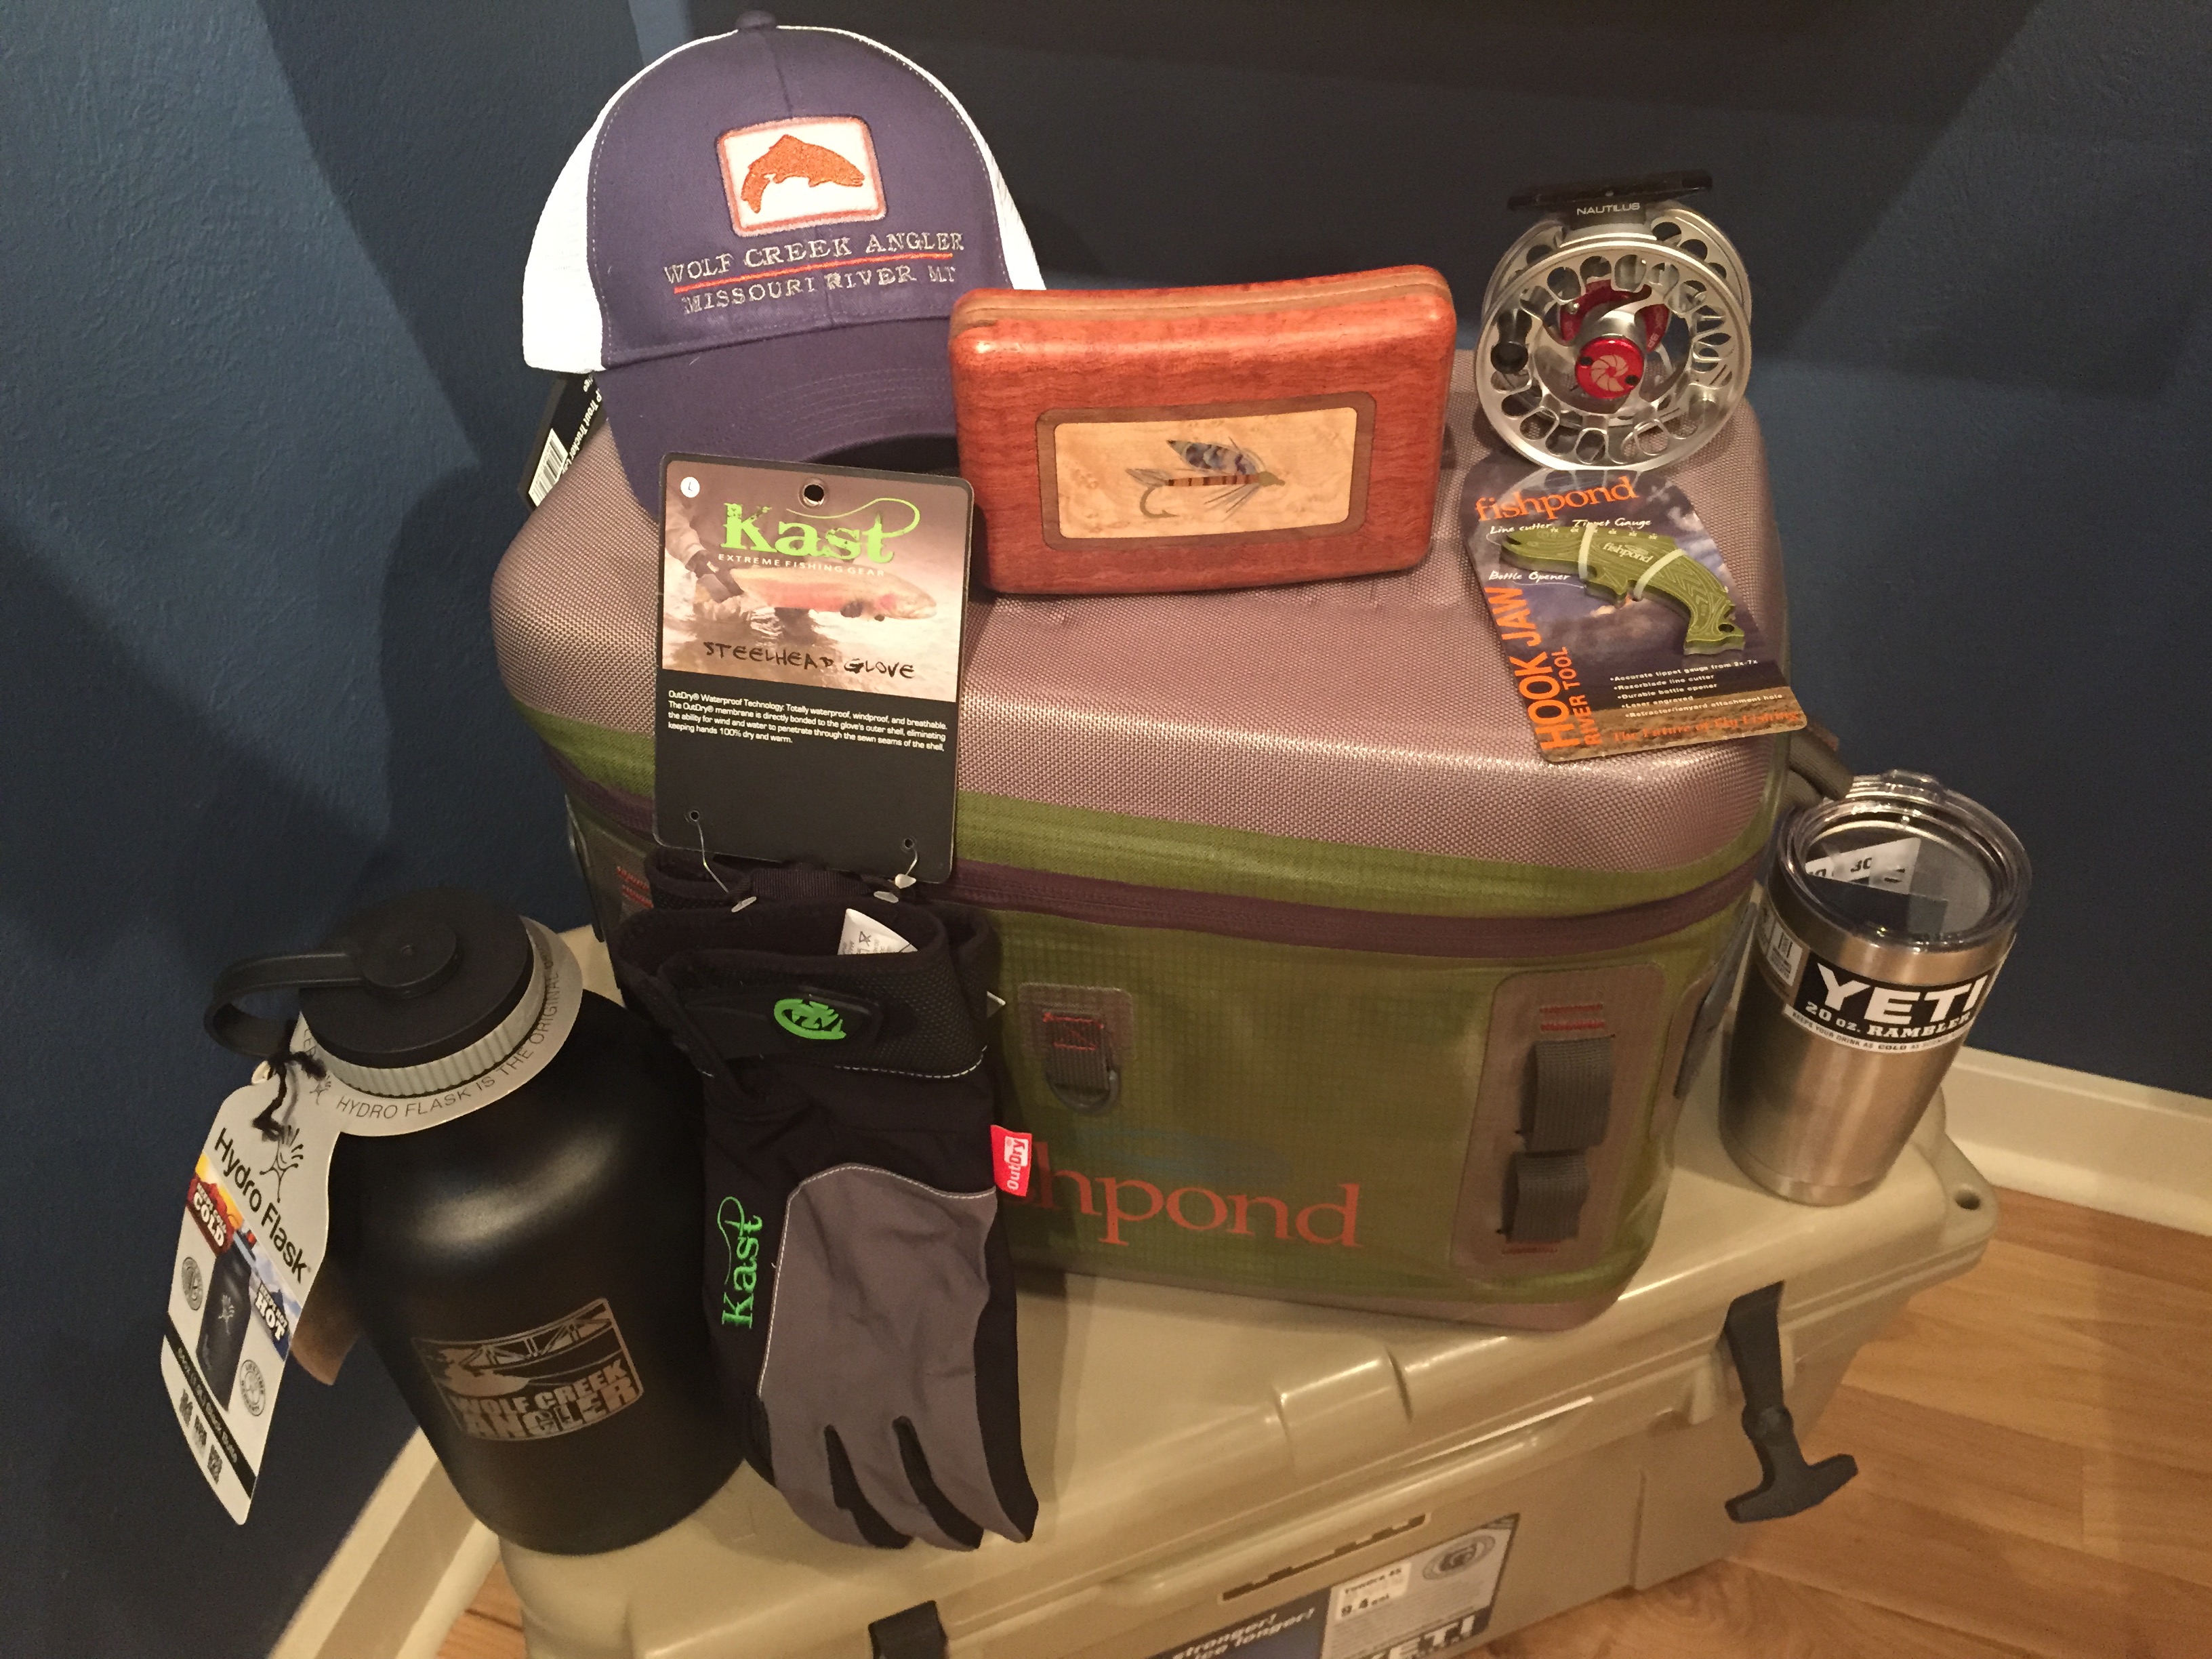 Great Father's Day Gifts at Wolf Creek Angler 